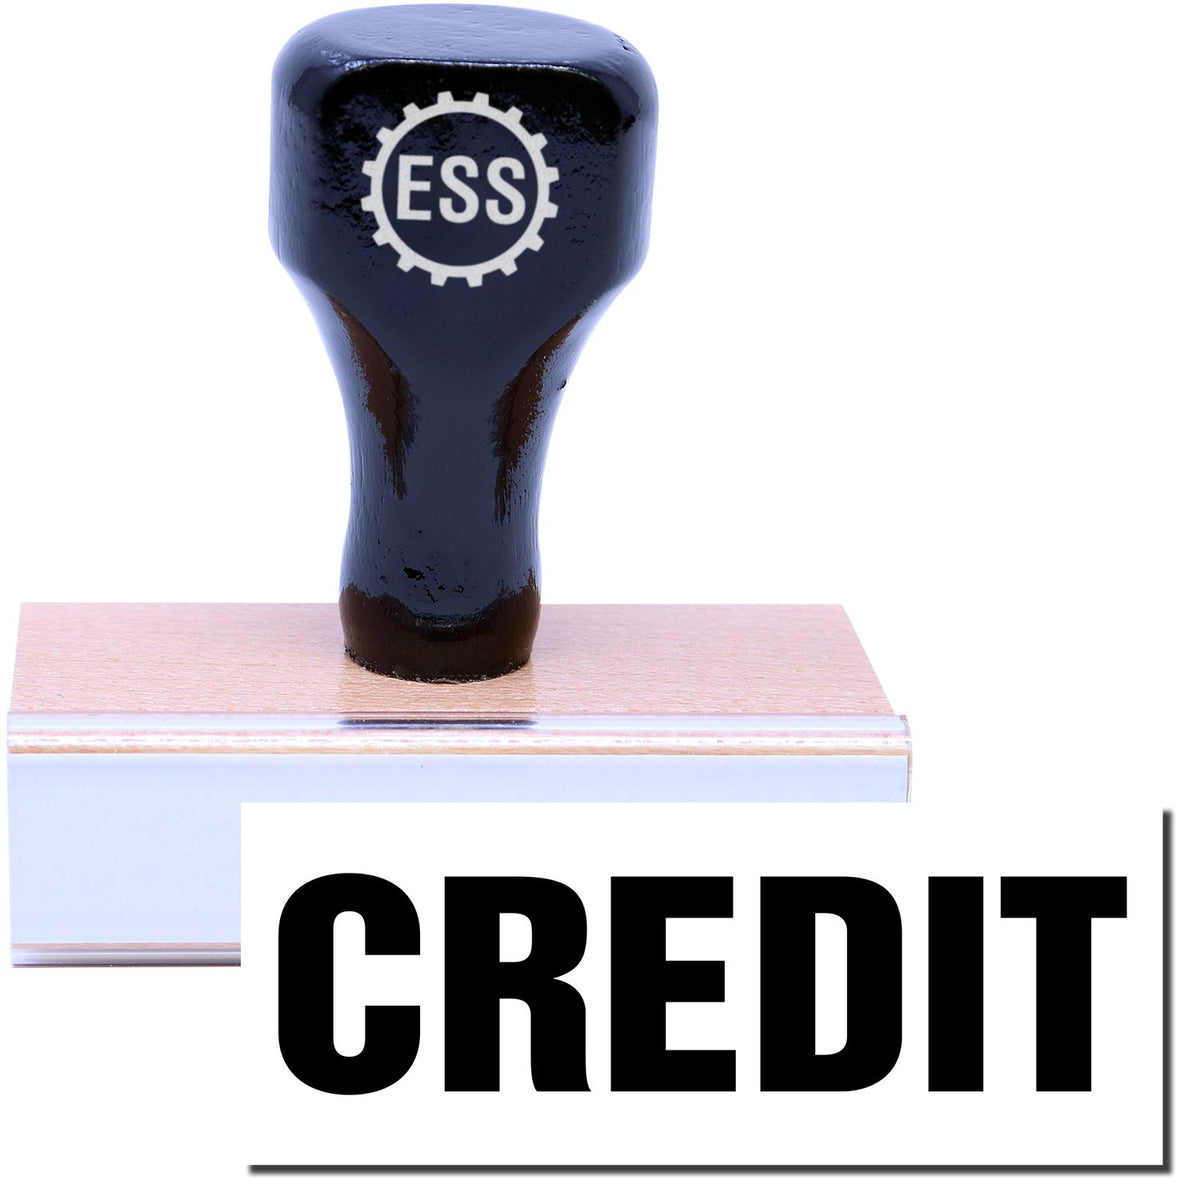 A stock office rubber stamp with a stamped image showing how the text &quot;CREDIT&quot; in bold font is displayed after stamping.